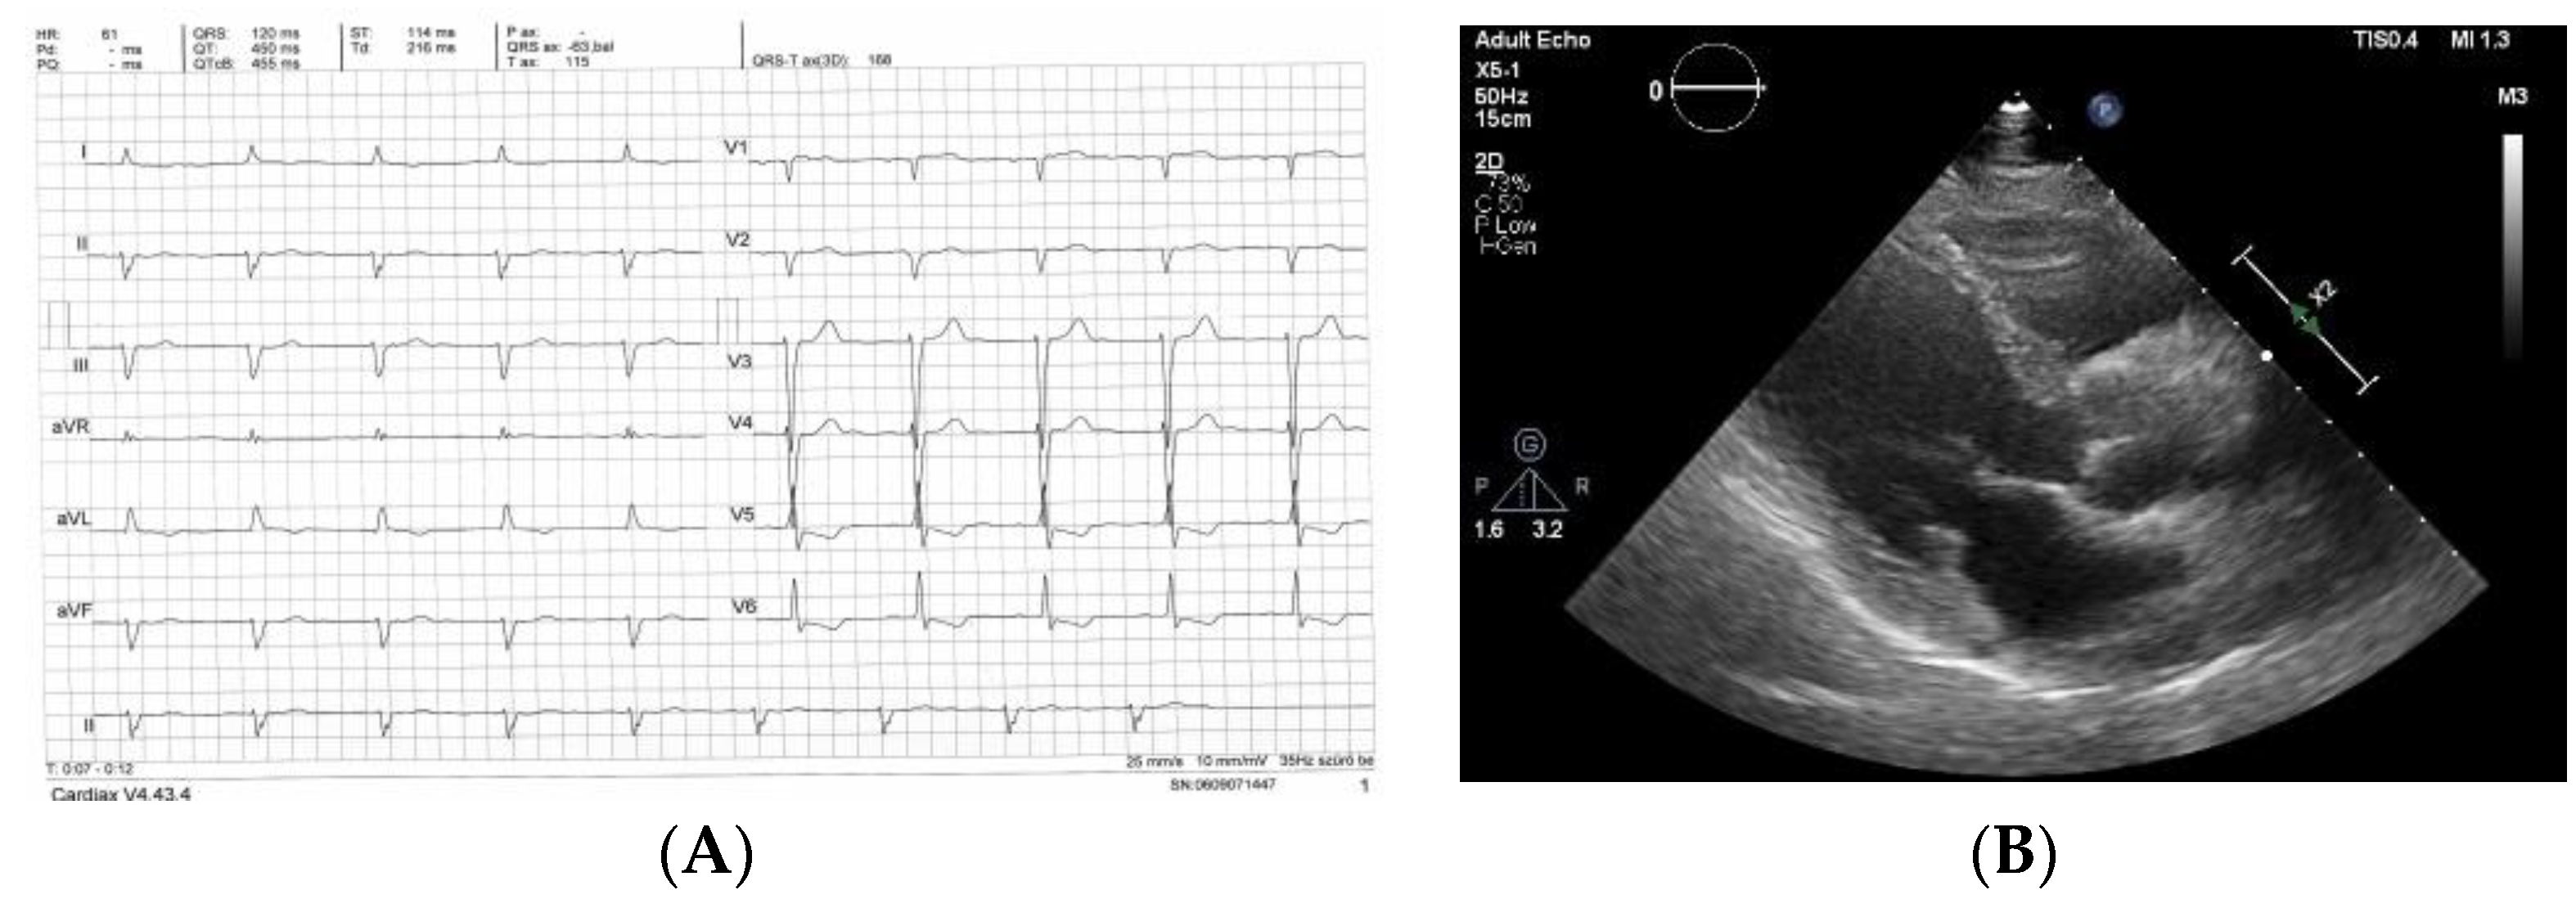 Two-dimensional Echocardiographic Assessment of Myocardial Strain:  Important Echocardiographic Parameter Readily Useful in Clinical Field. -  Abstract - Europe PMC